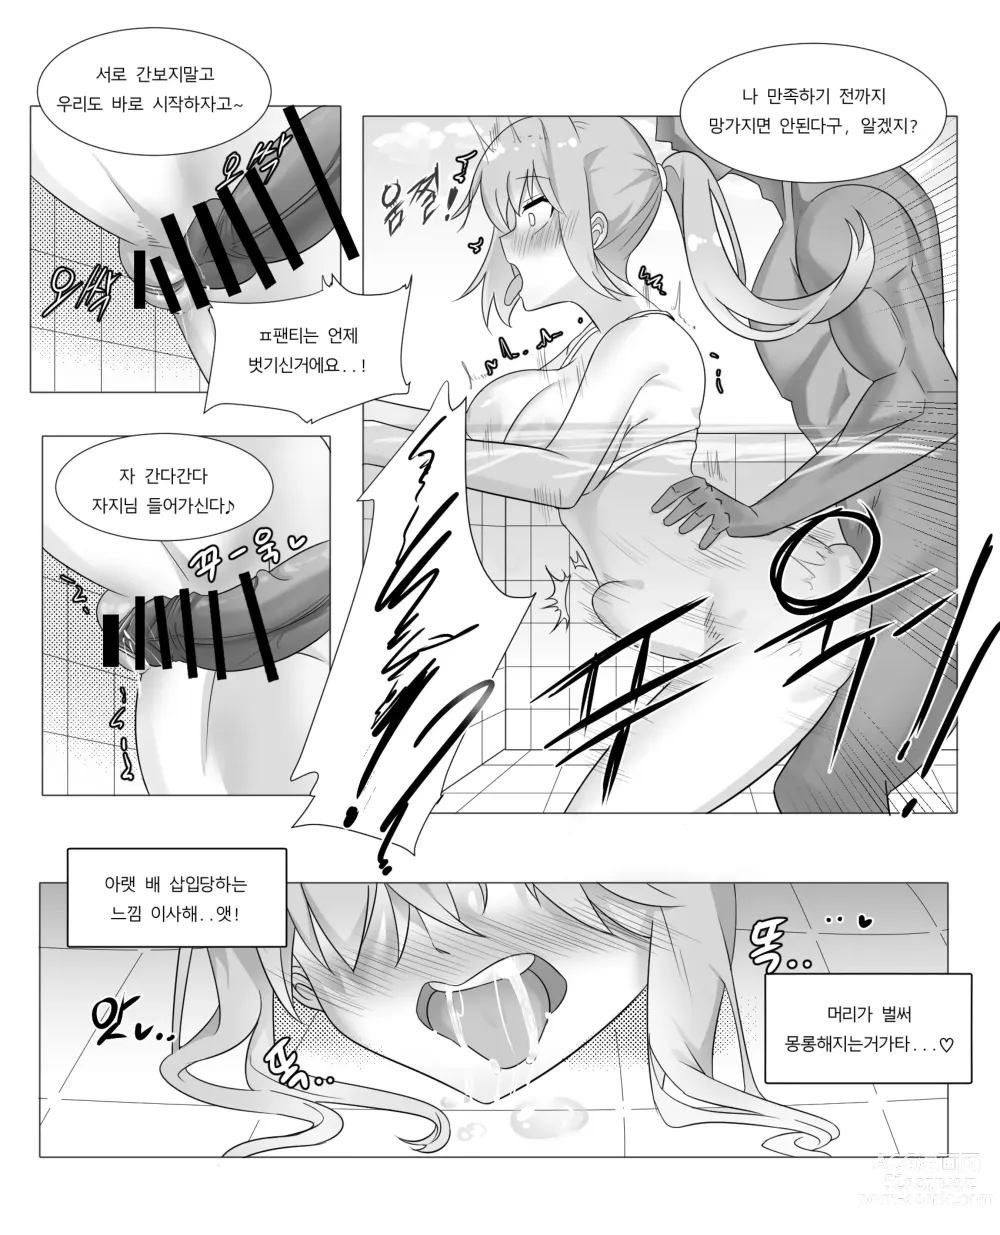 Page 14 of doujinshi Morphonica Group Camp Request